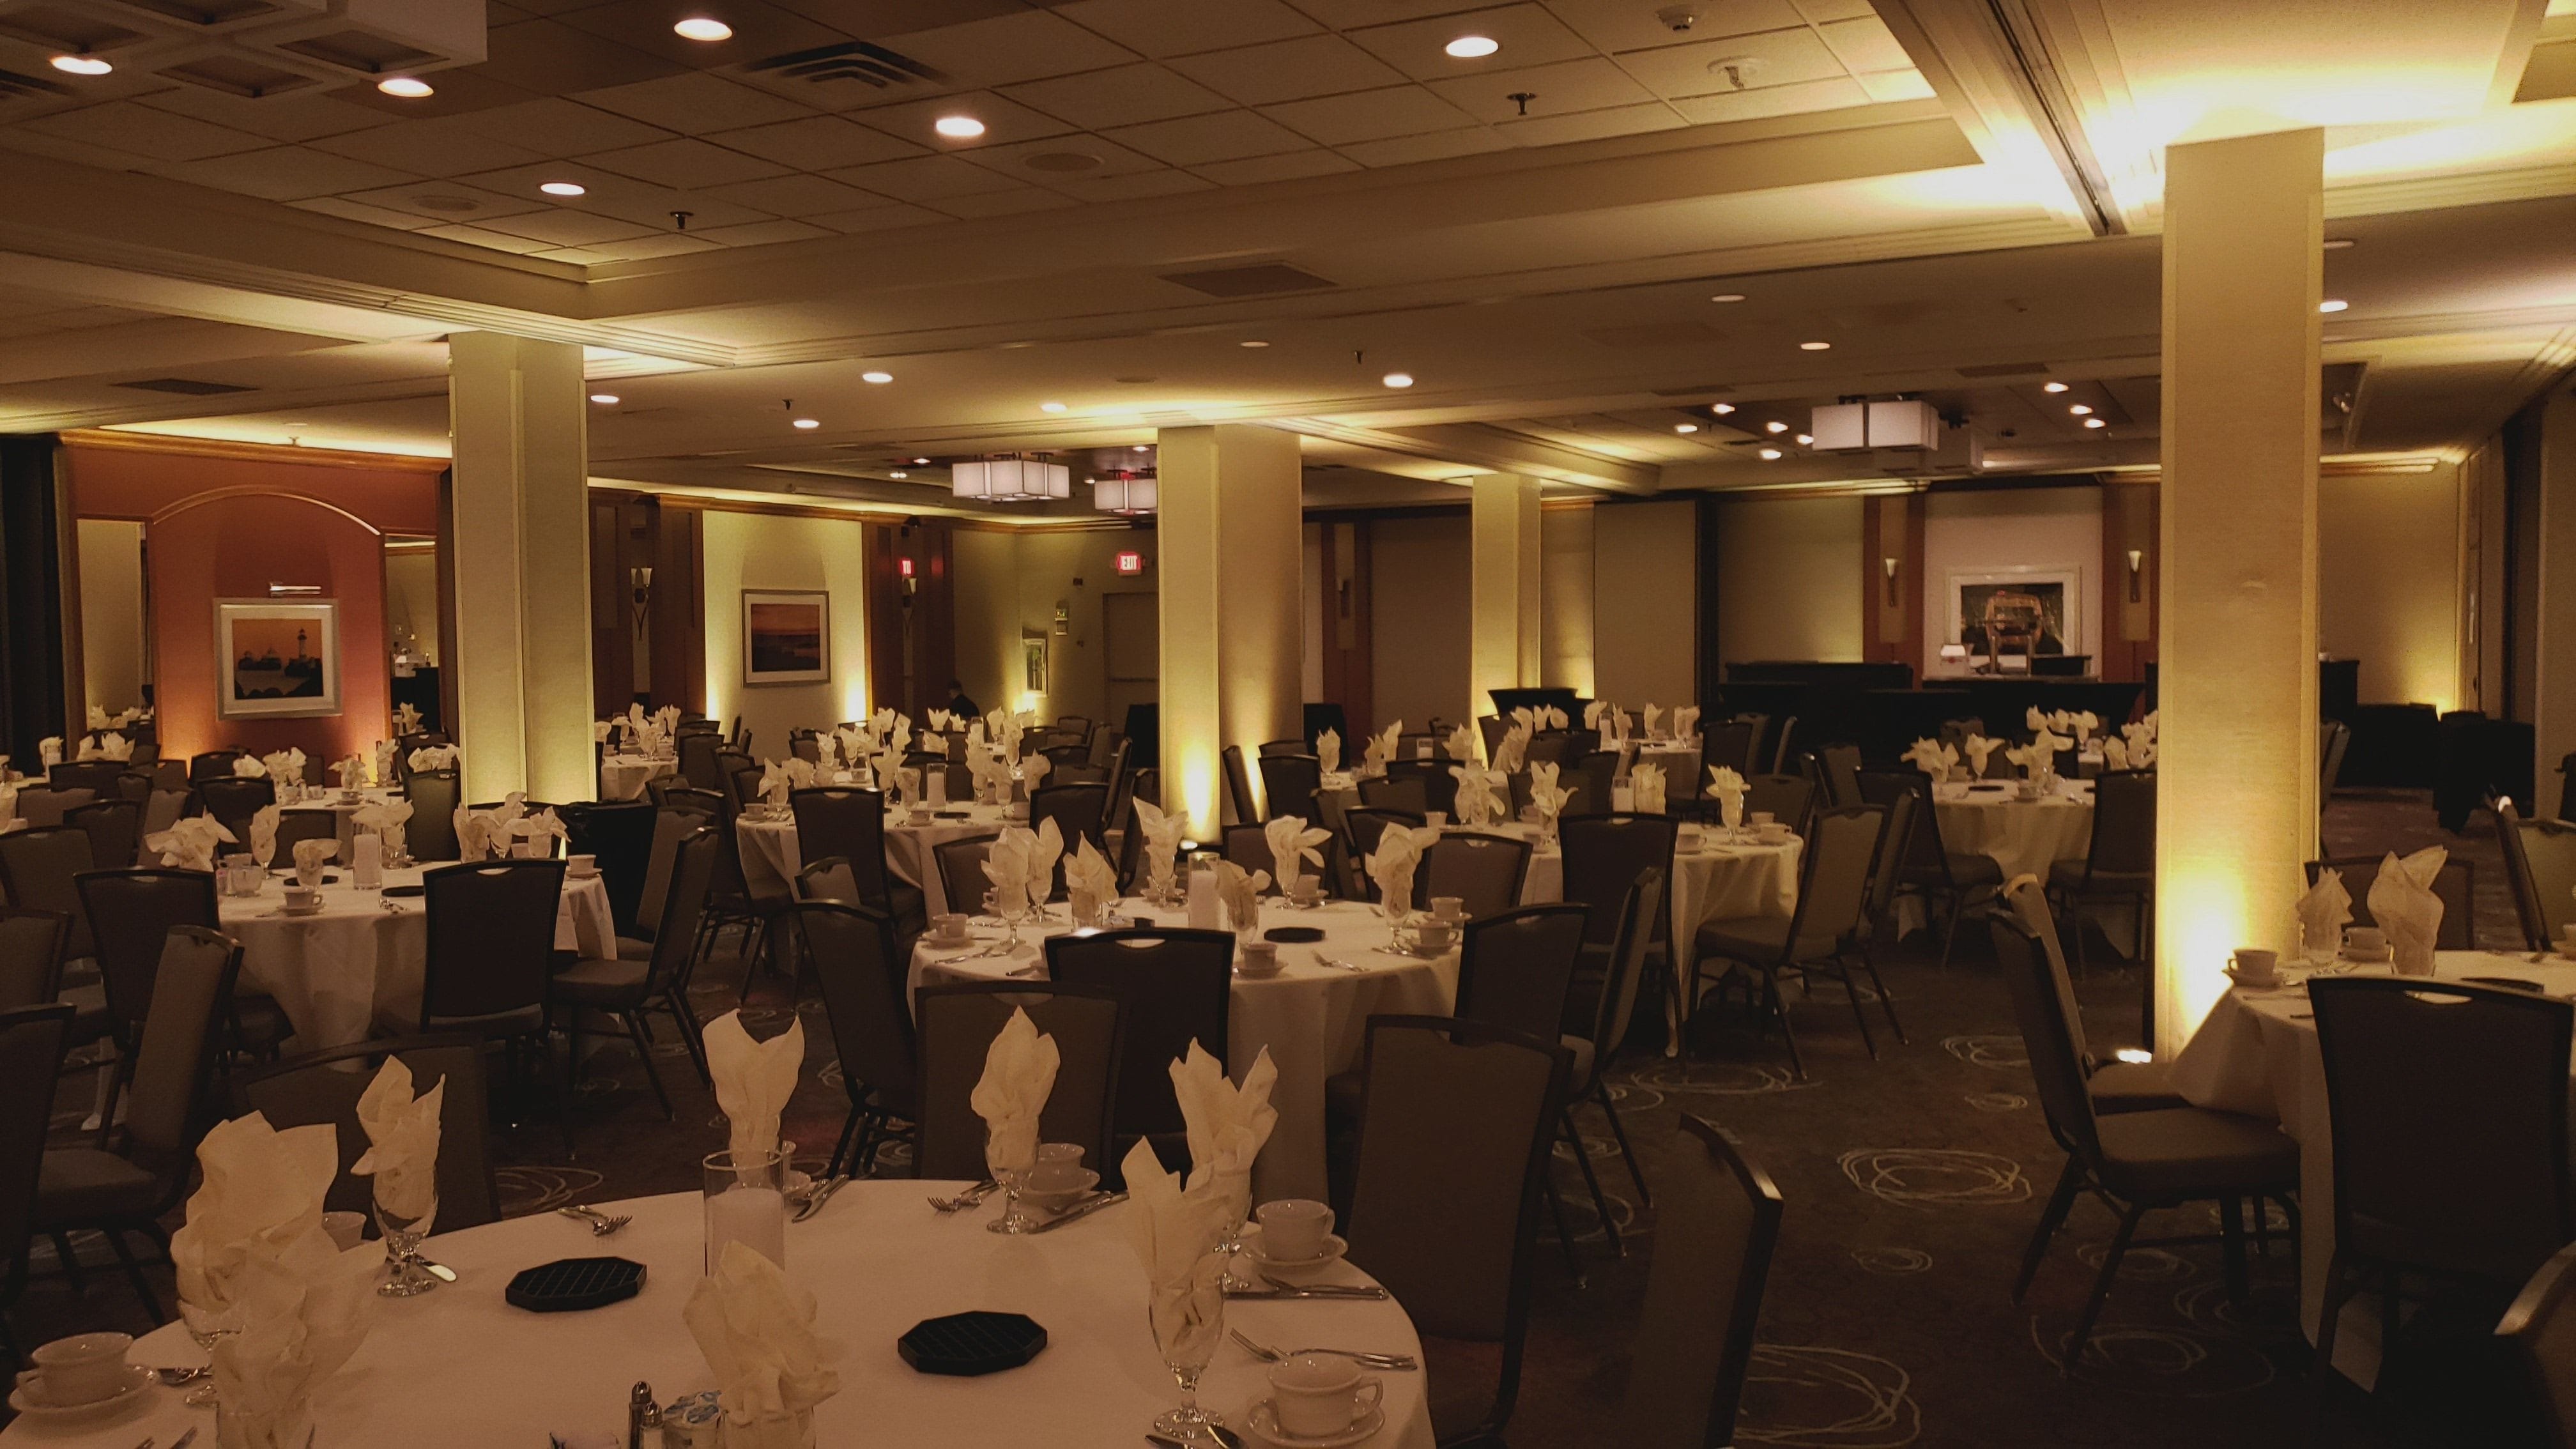 Holiday Inn, Duluth
Great Lakes Ballroom with champagne wedding lighting.